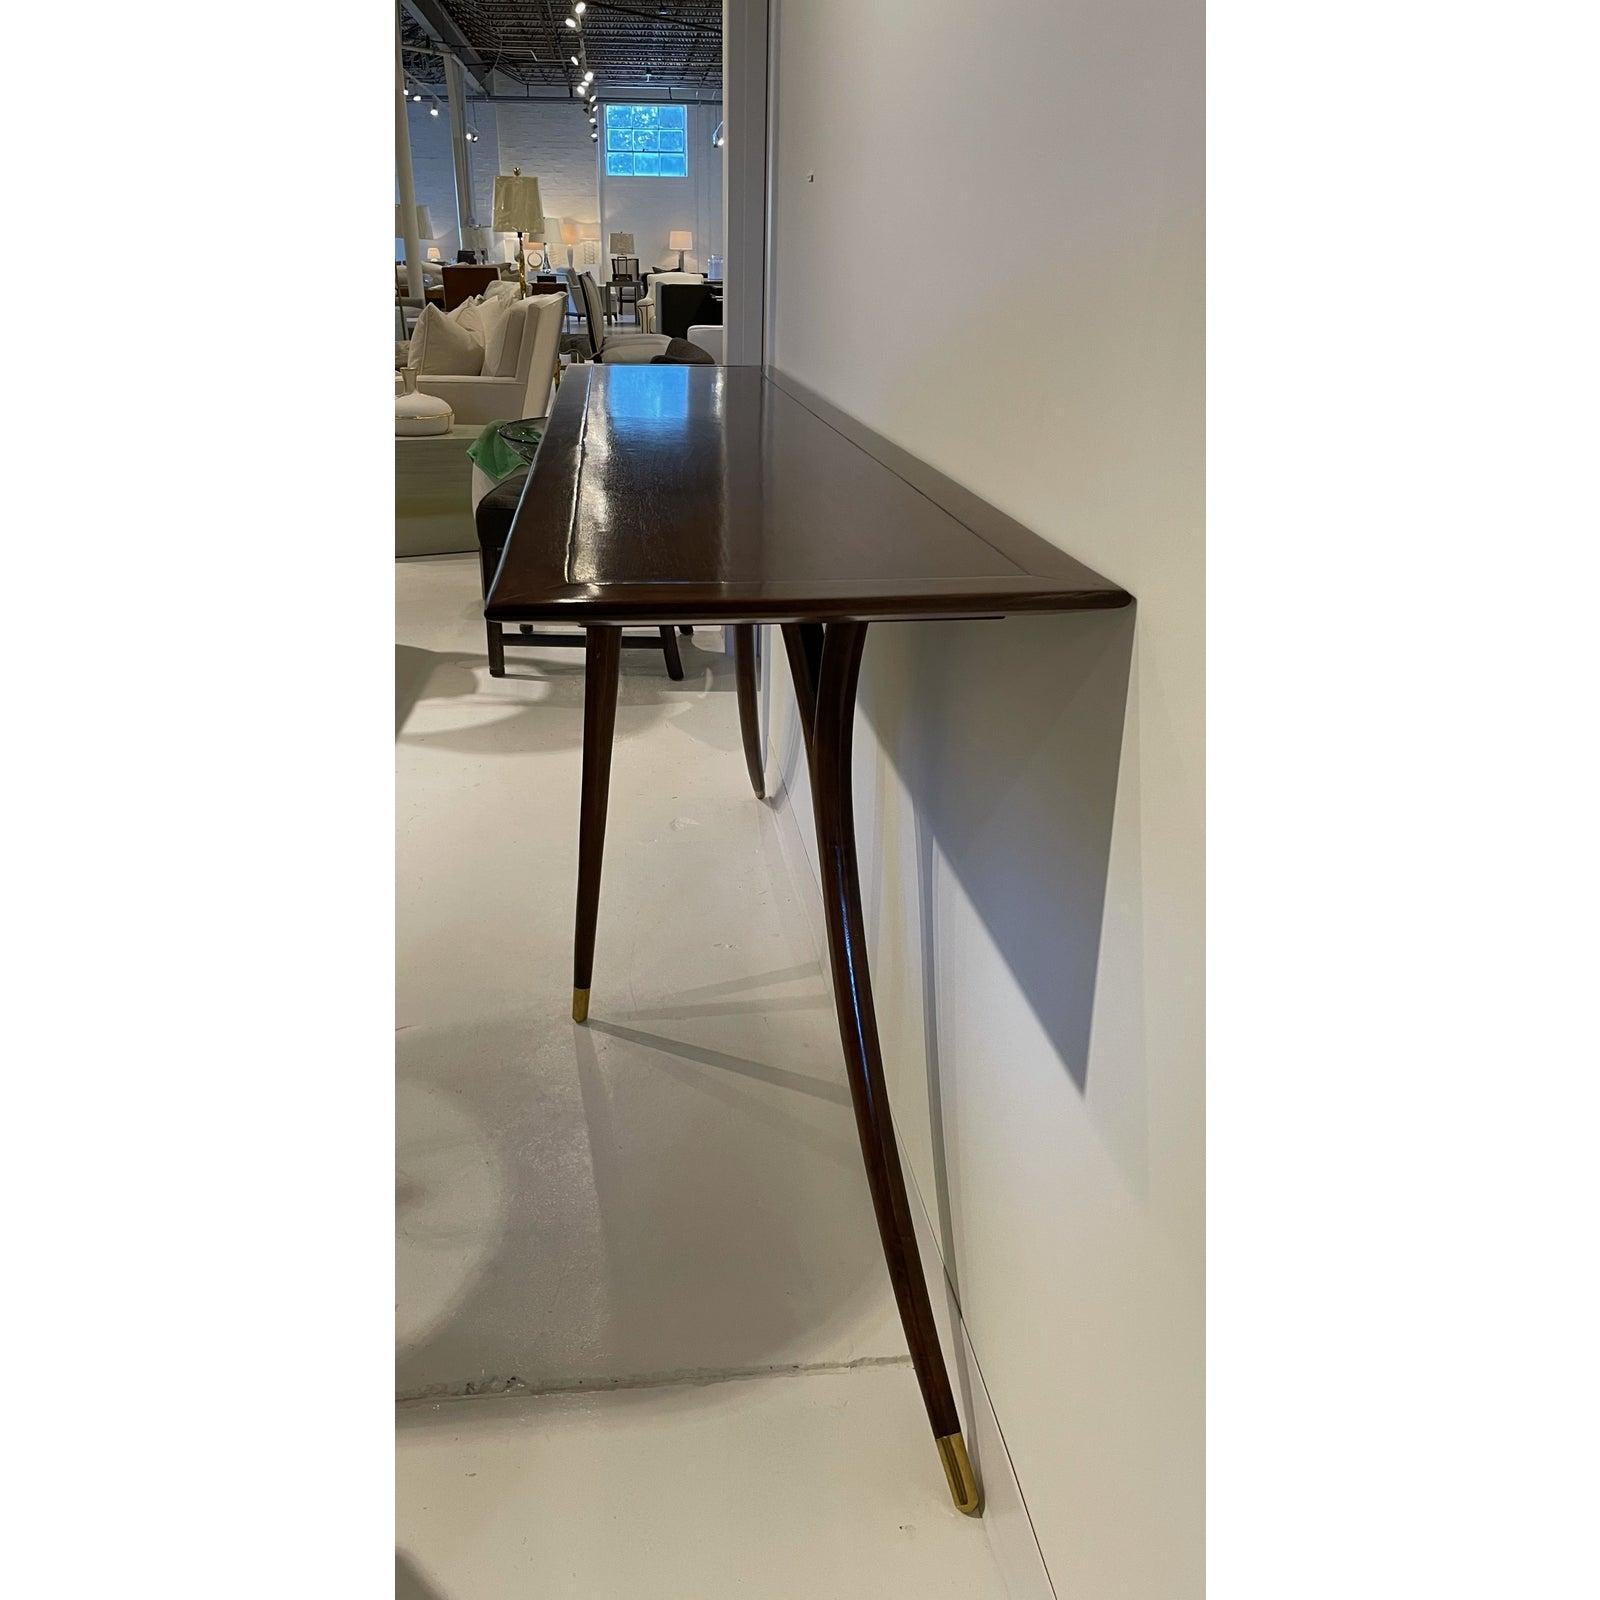 Showroom new - montique mid century console - natural waxed finish walnut with light brass finish metal ferrules. A statement piece in any room of your home or business.